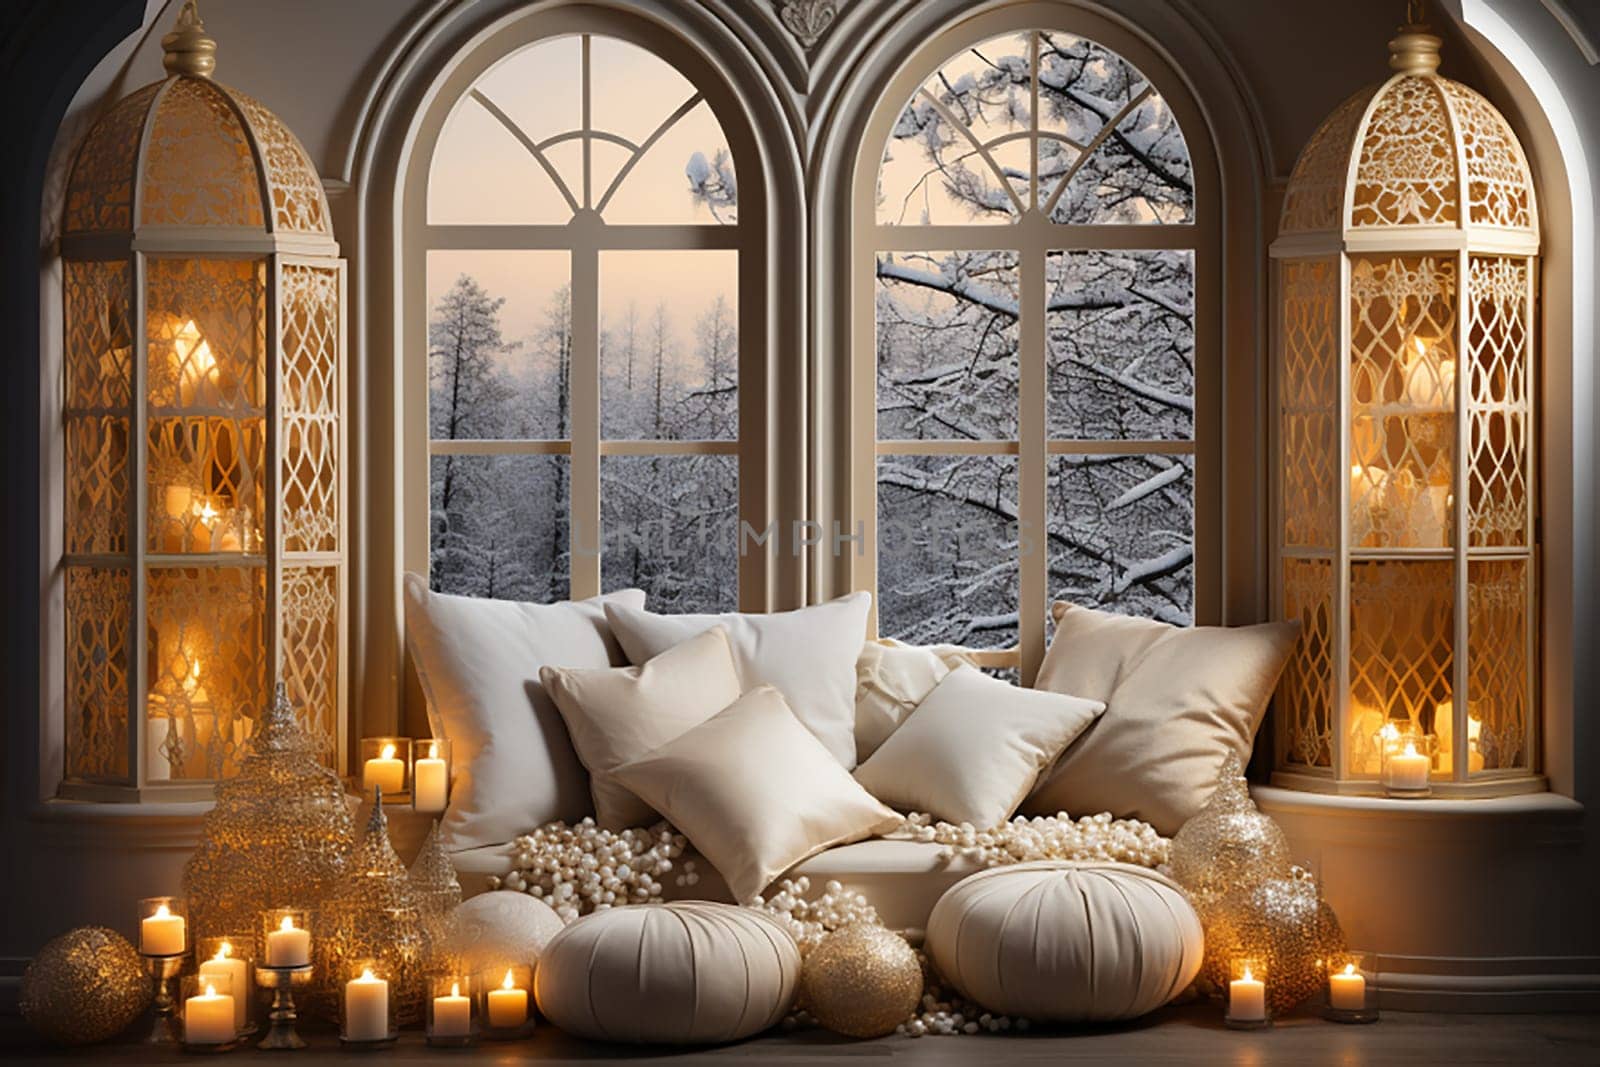 Illuminated room with a large window decorated for Christmas by Ciorba